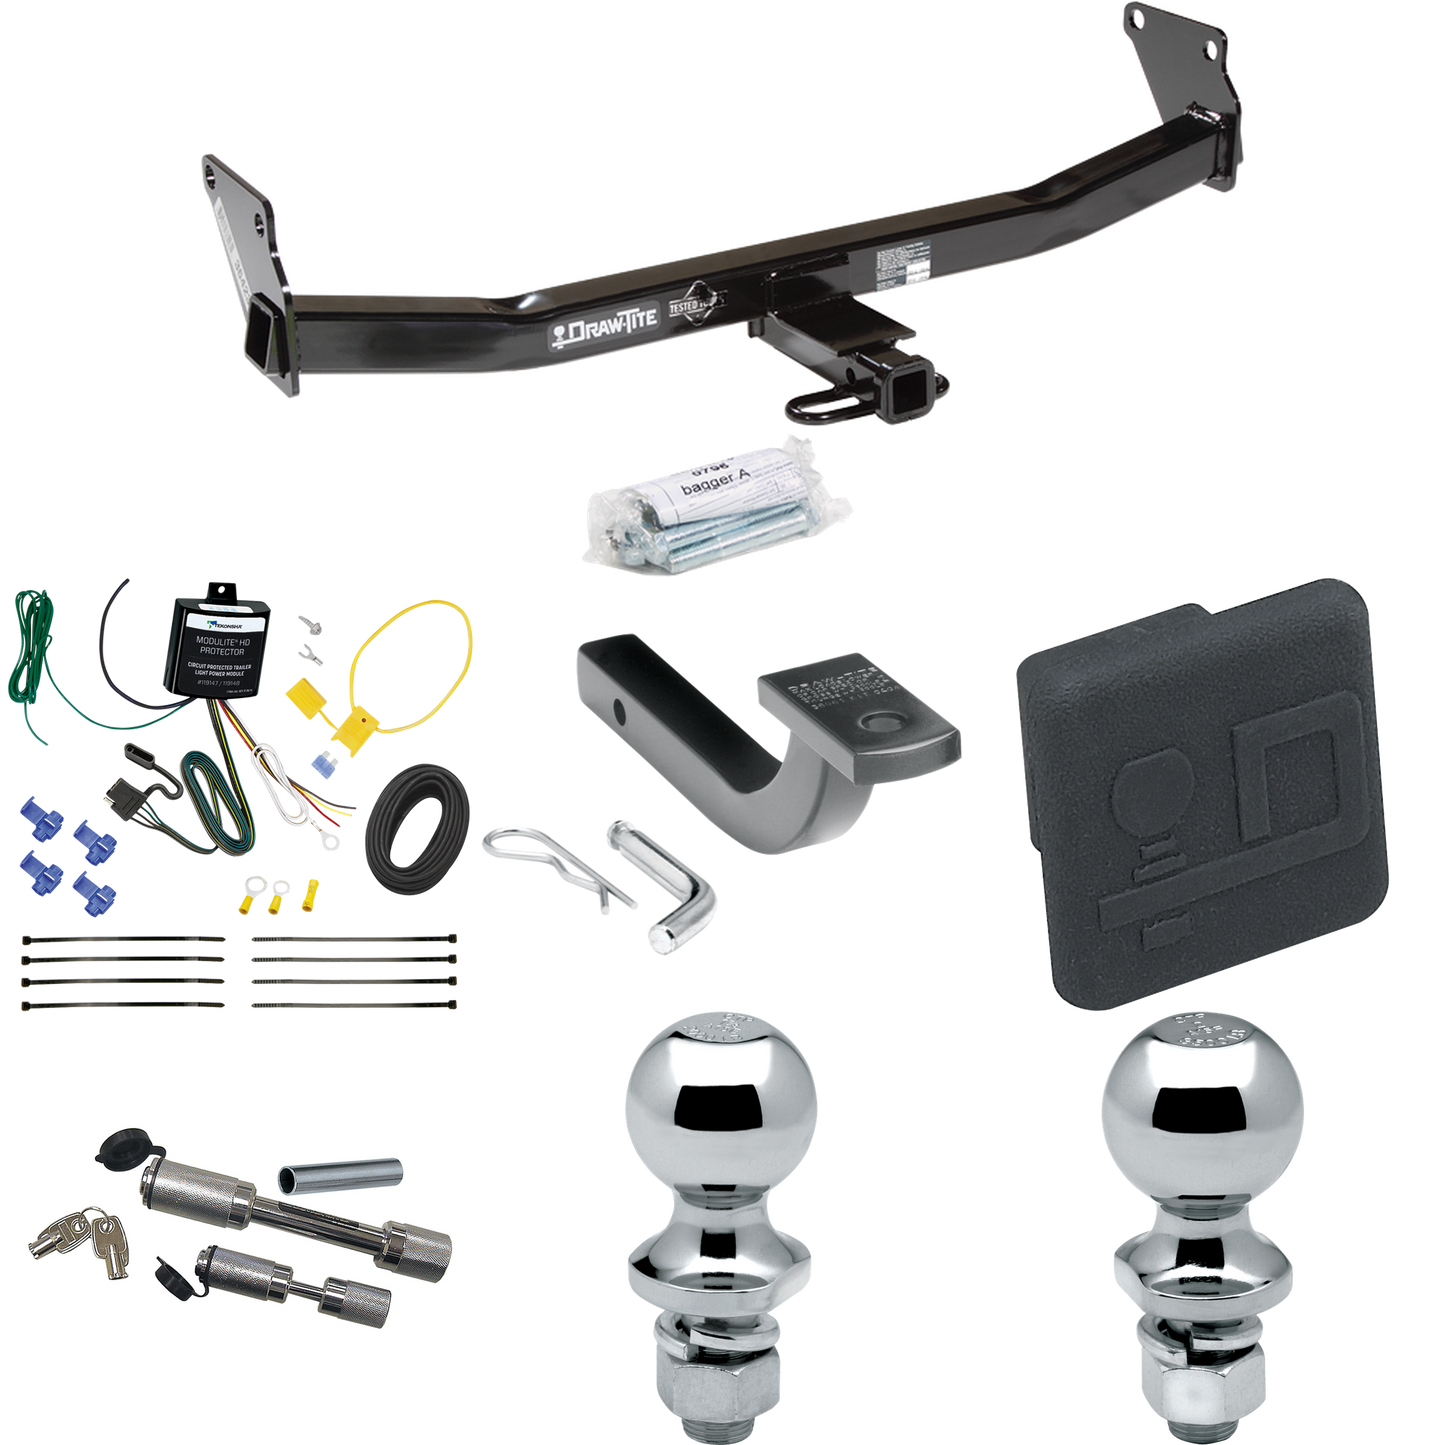 Fits 2007-2007 Jeep Patriot Trailer Hitch Tow PKG w/ 4-Flat Wiring Harness + Draw-Bar + 1-7/8" + 2" Ball + Hitch Cover + Dual Hitch & Coupler Locks By Draw-Tite